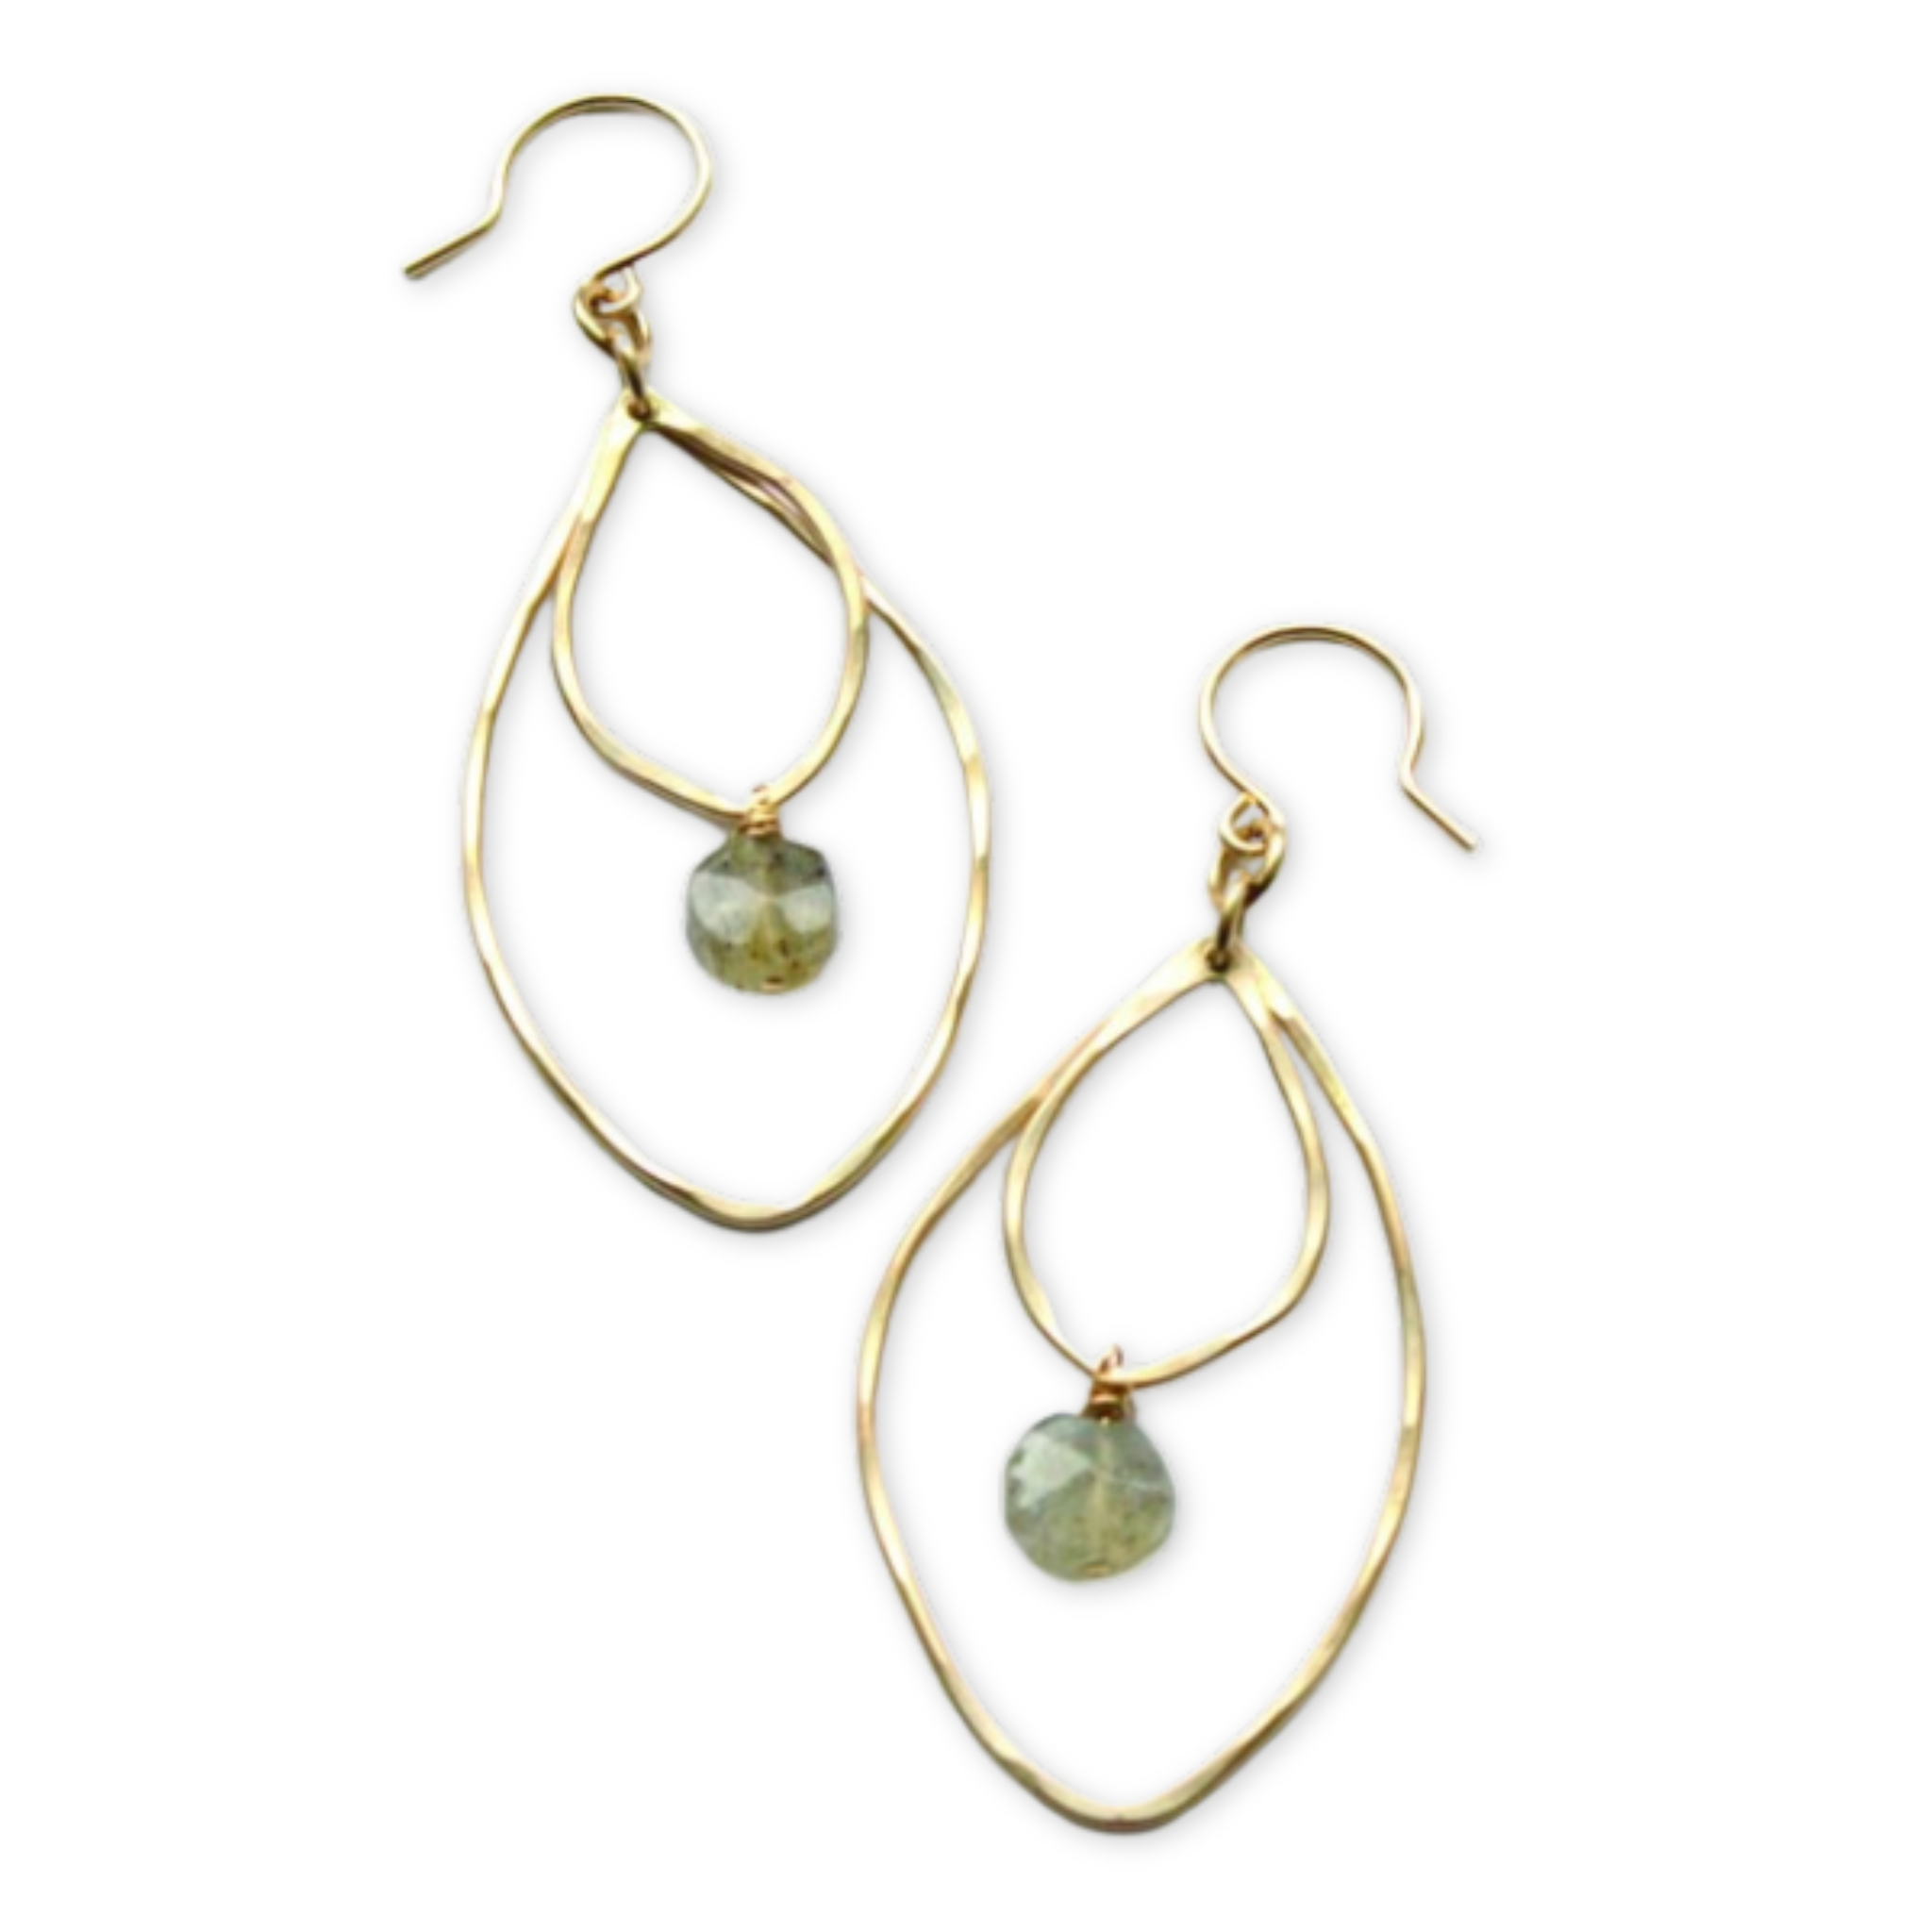 dangling leaf shaped earrings with hanging labradorite stones